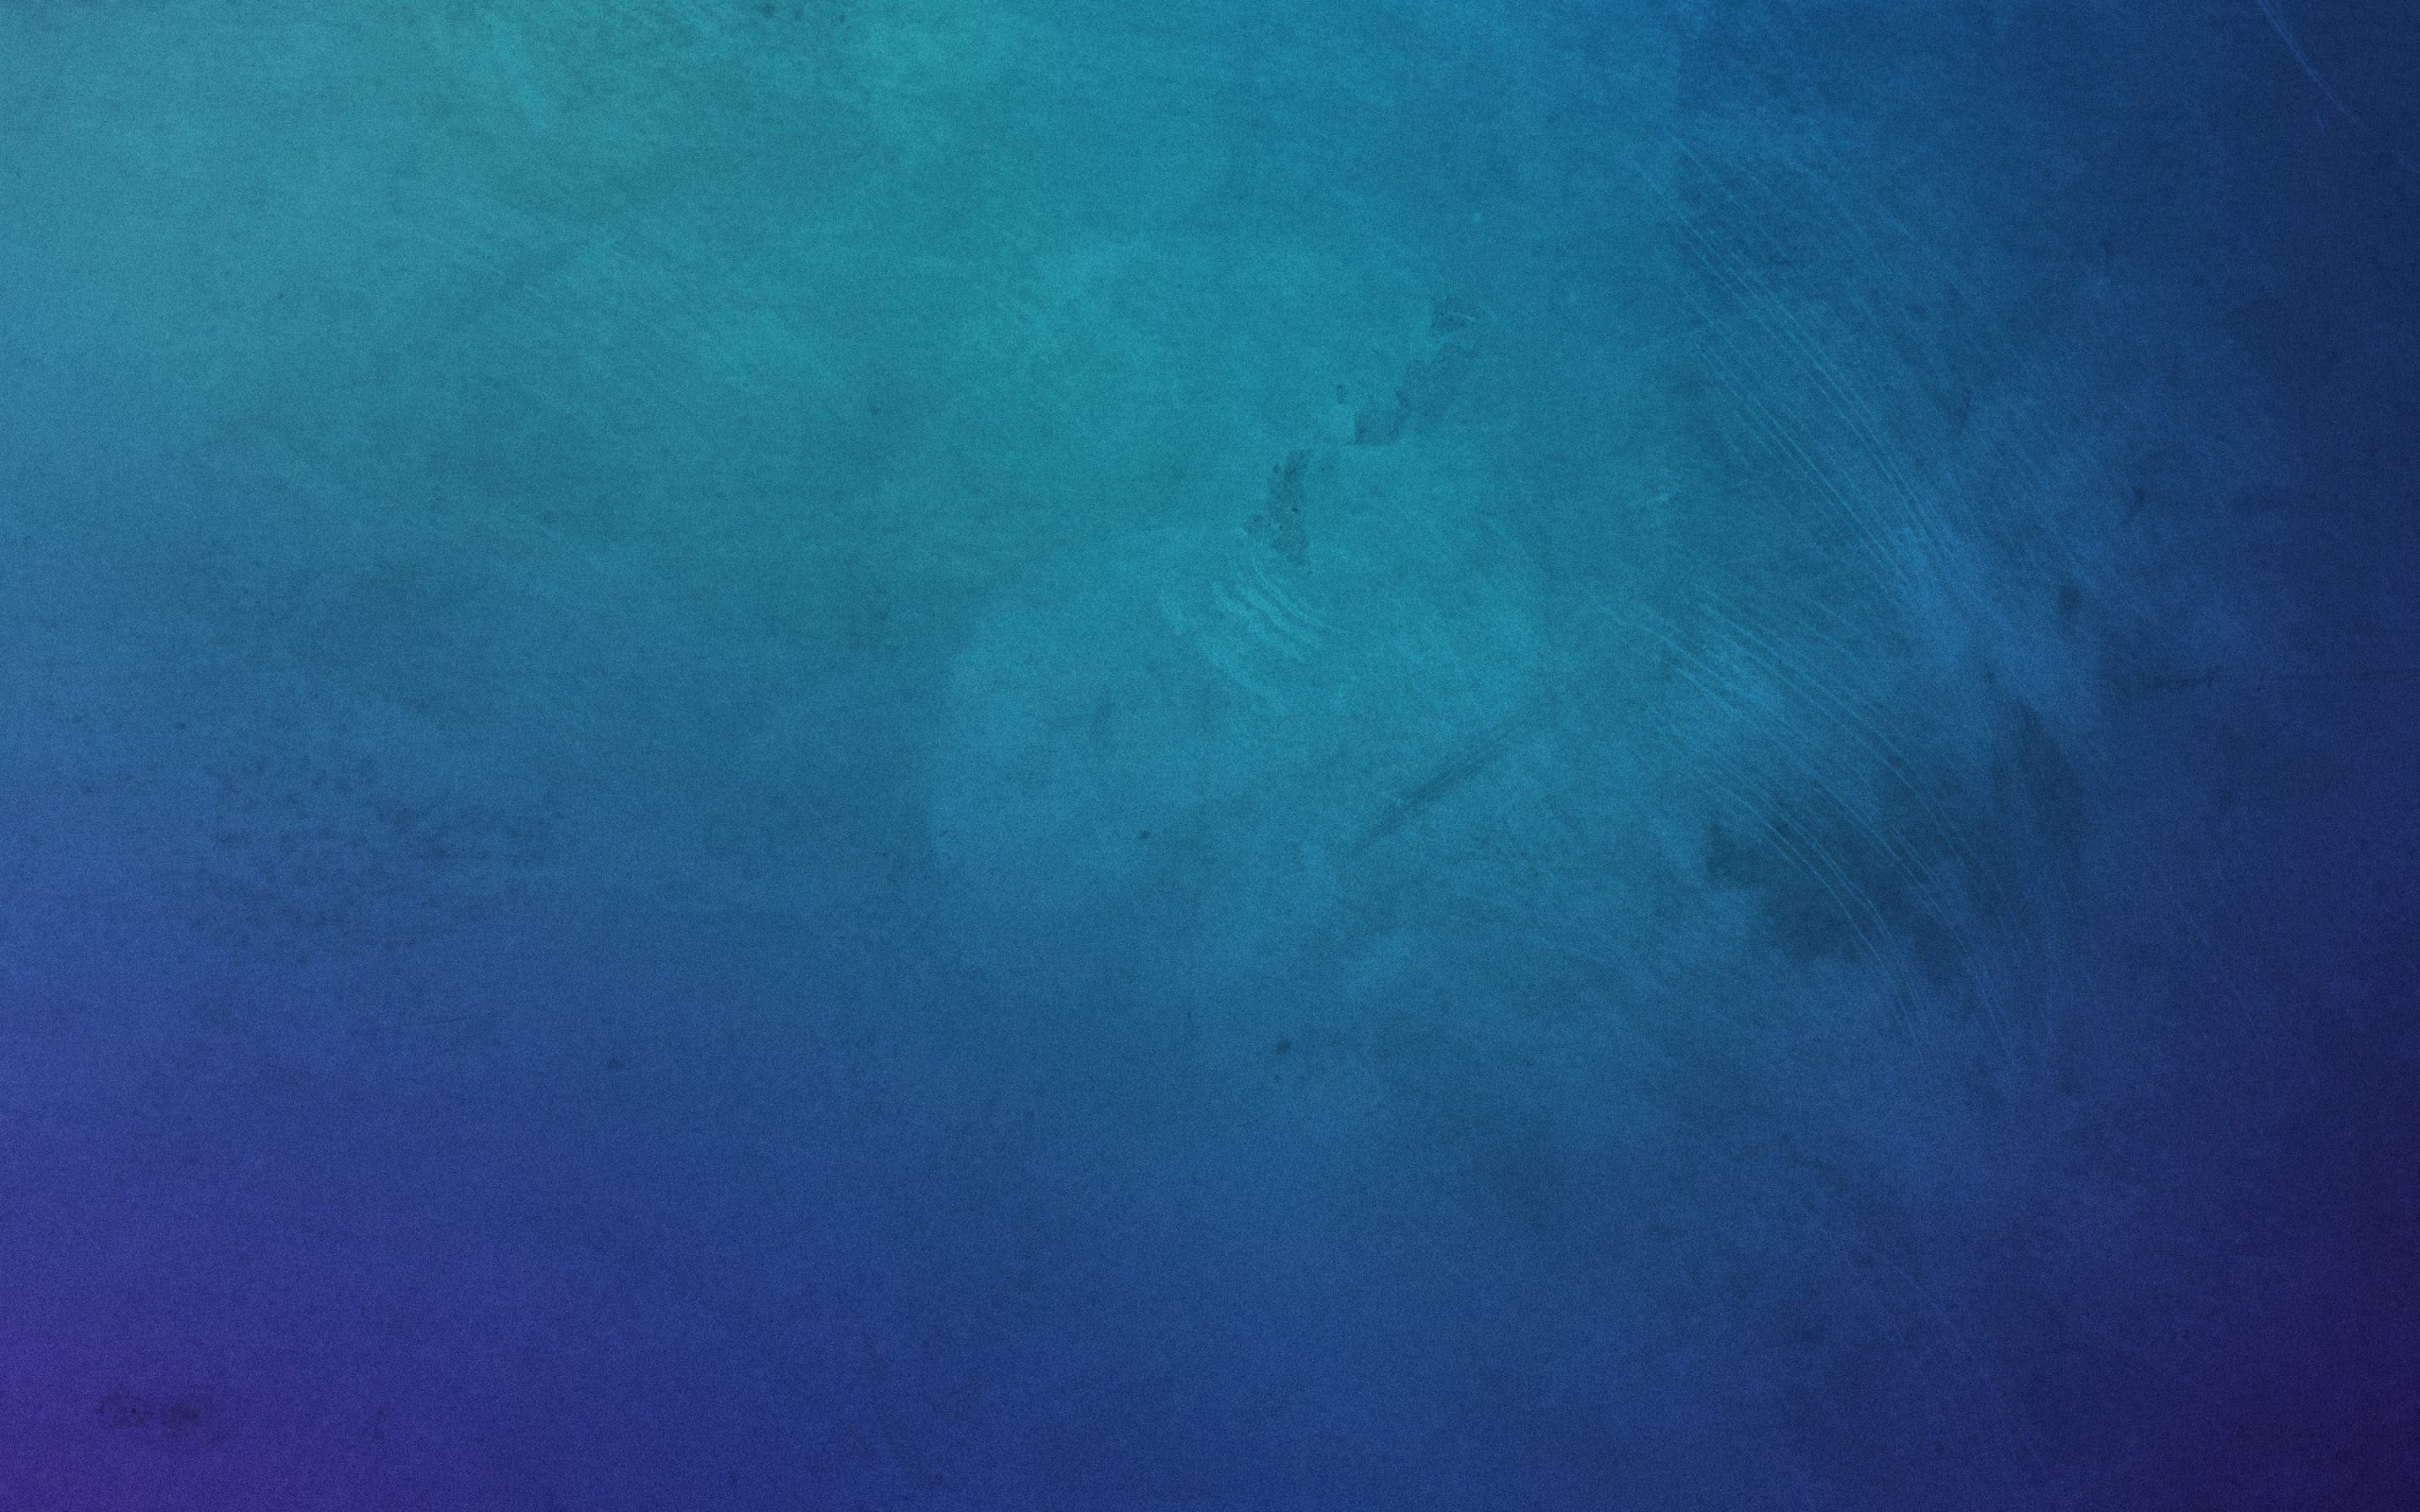 Texture Wallpaper HD, Simple Background, Blue, Minimalism, Blue Background  - Wallpaperforu